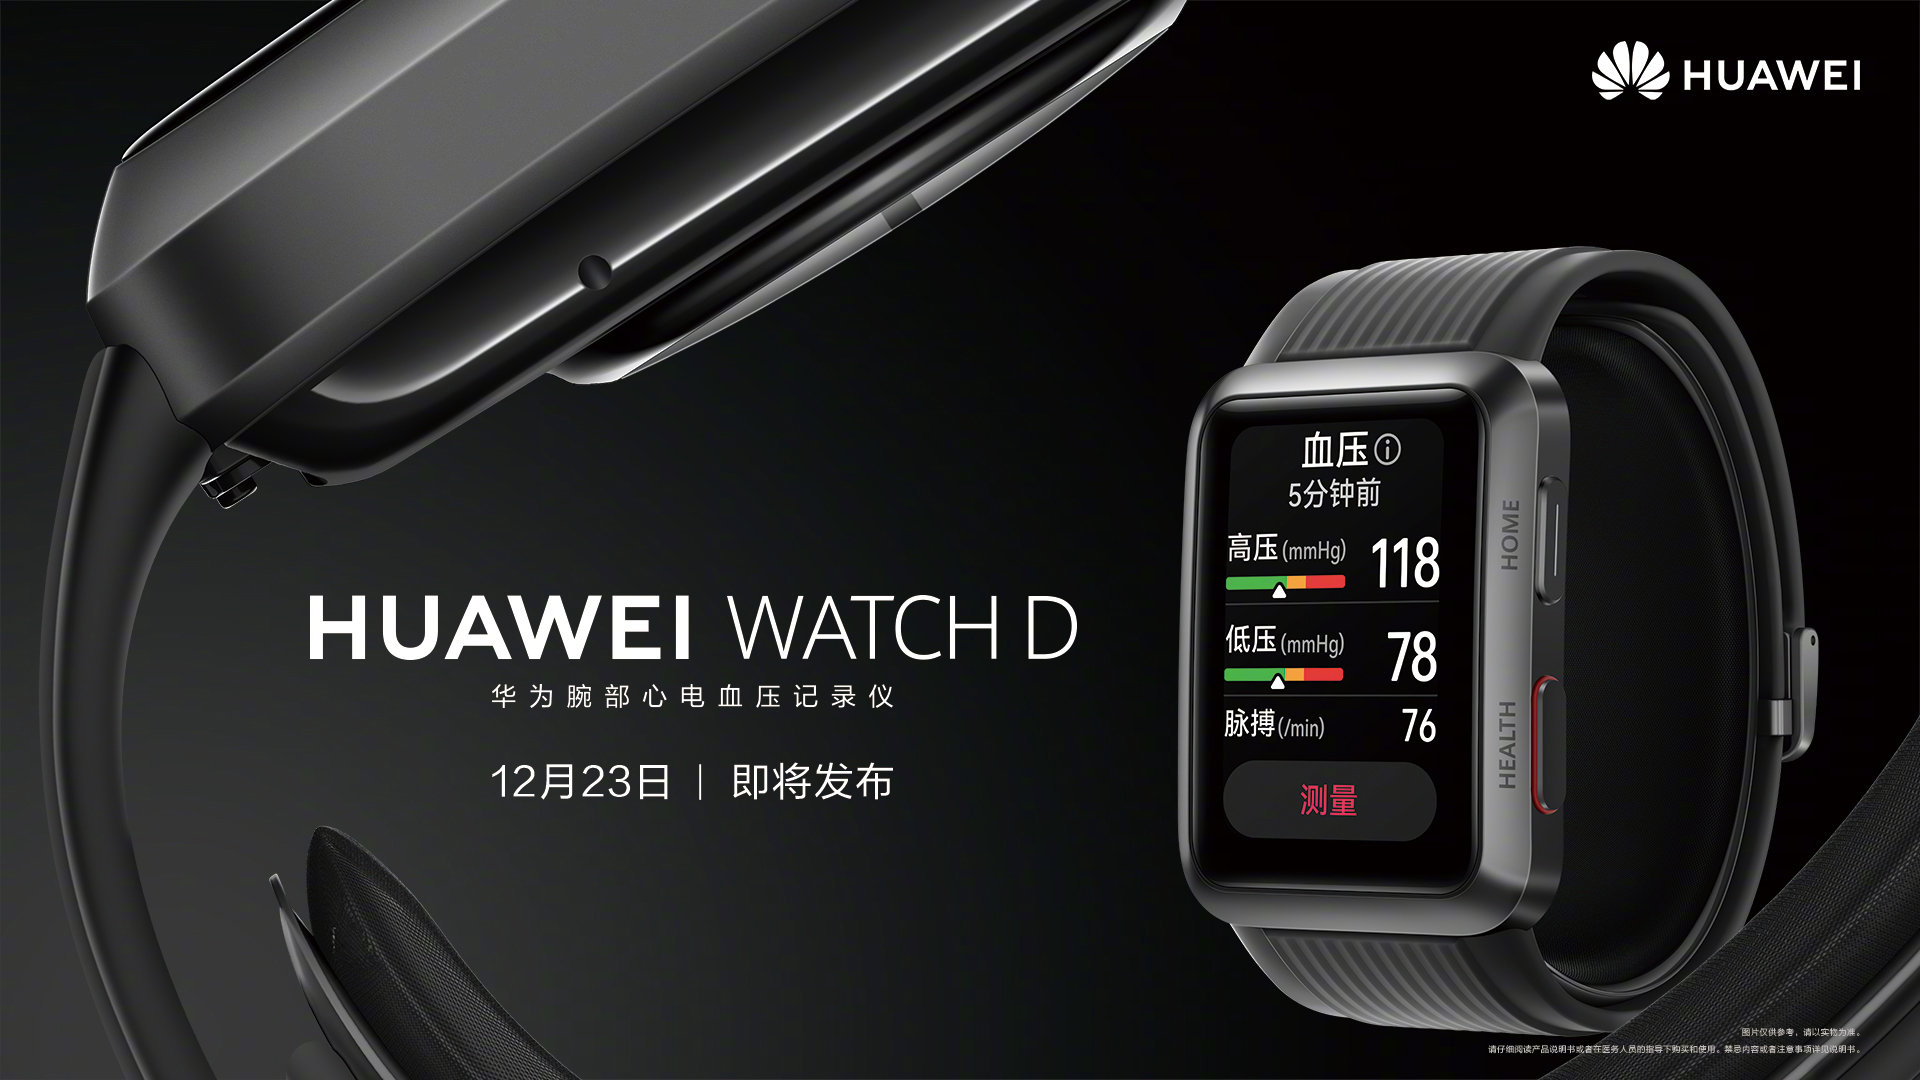 Huawei Watch D official teaser confirms Class II medical device  certification for blood pressure and ECG measurements - NotebookCheck.net  News